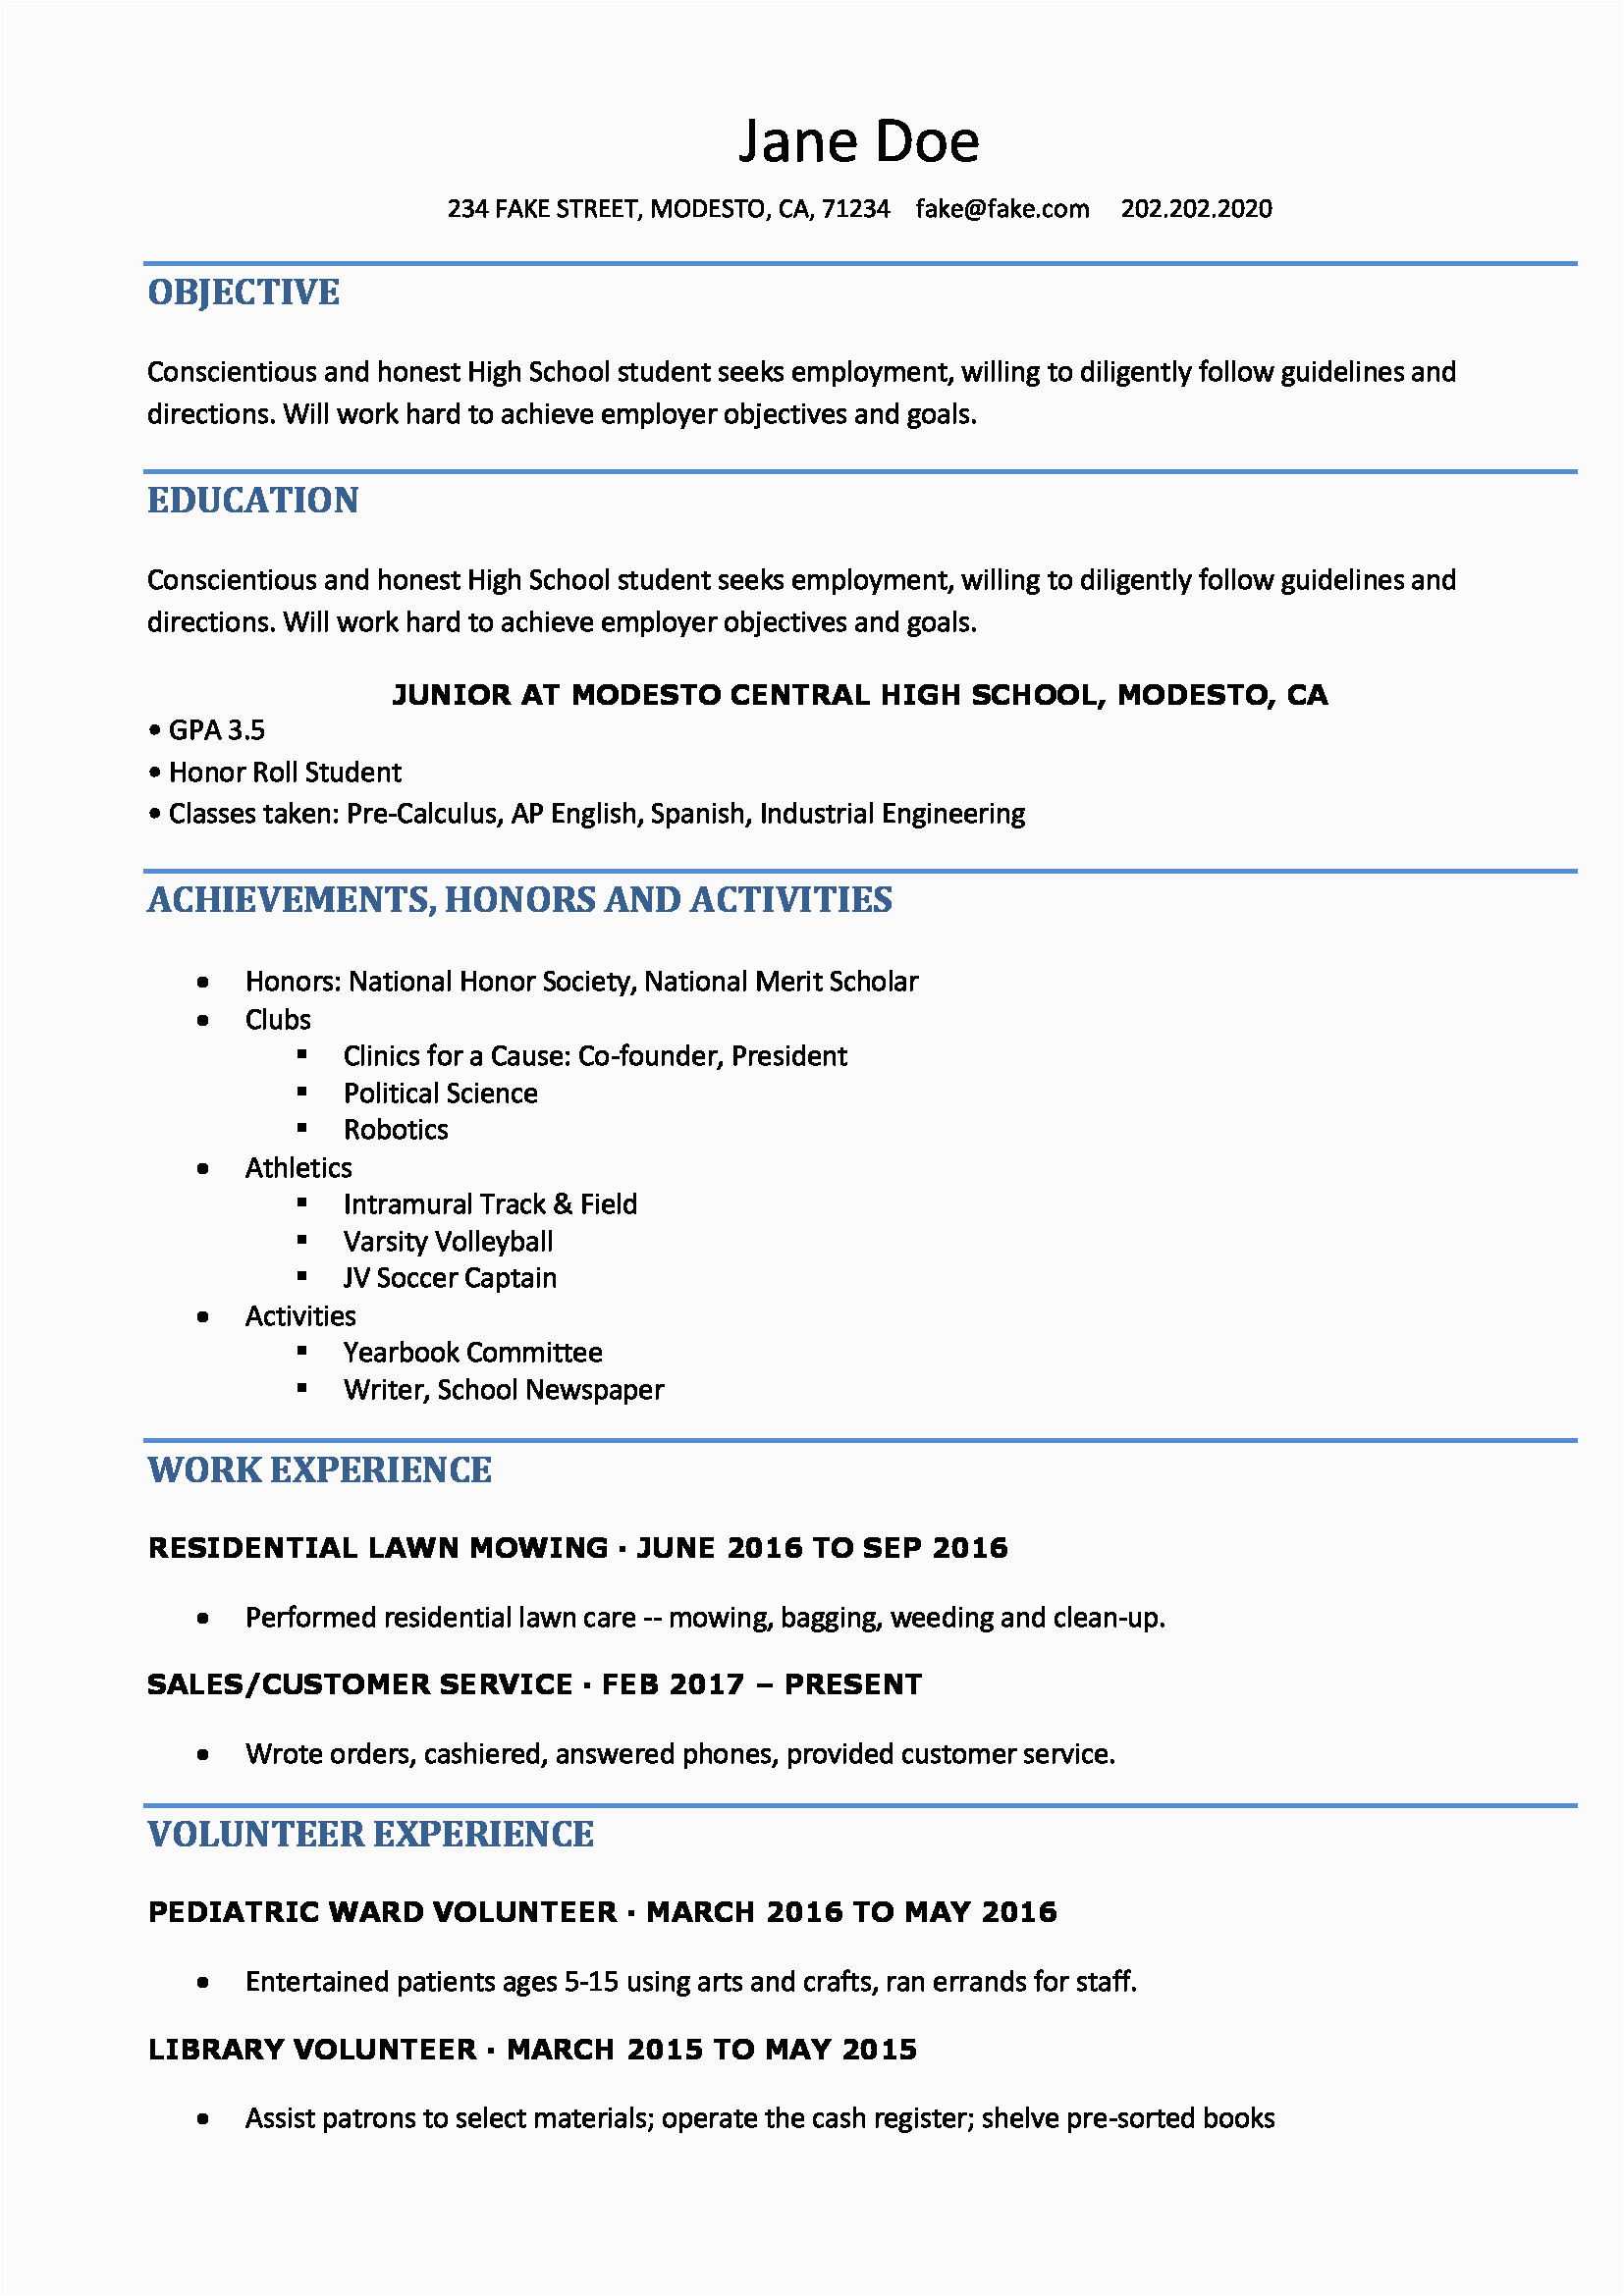 Resume Writing for High School Students Template High School Resume Resume Templates for High School